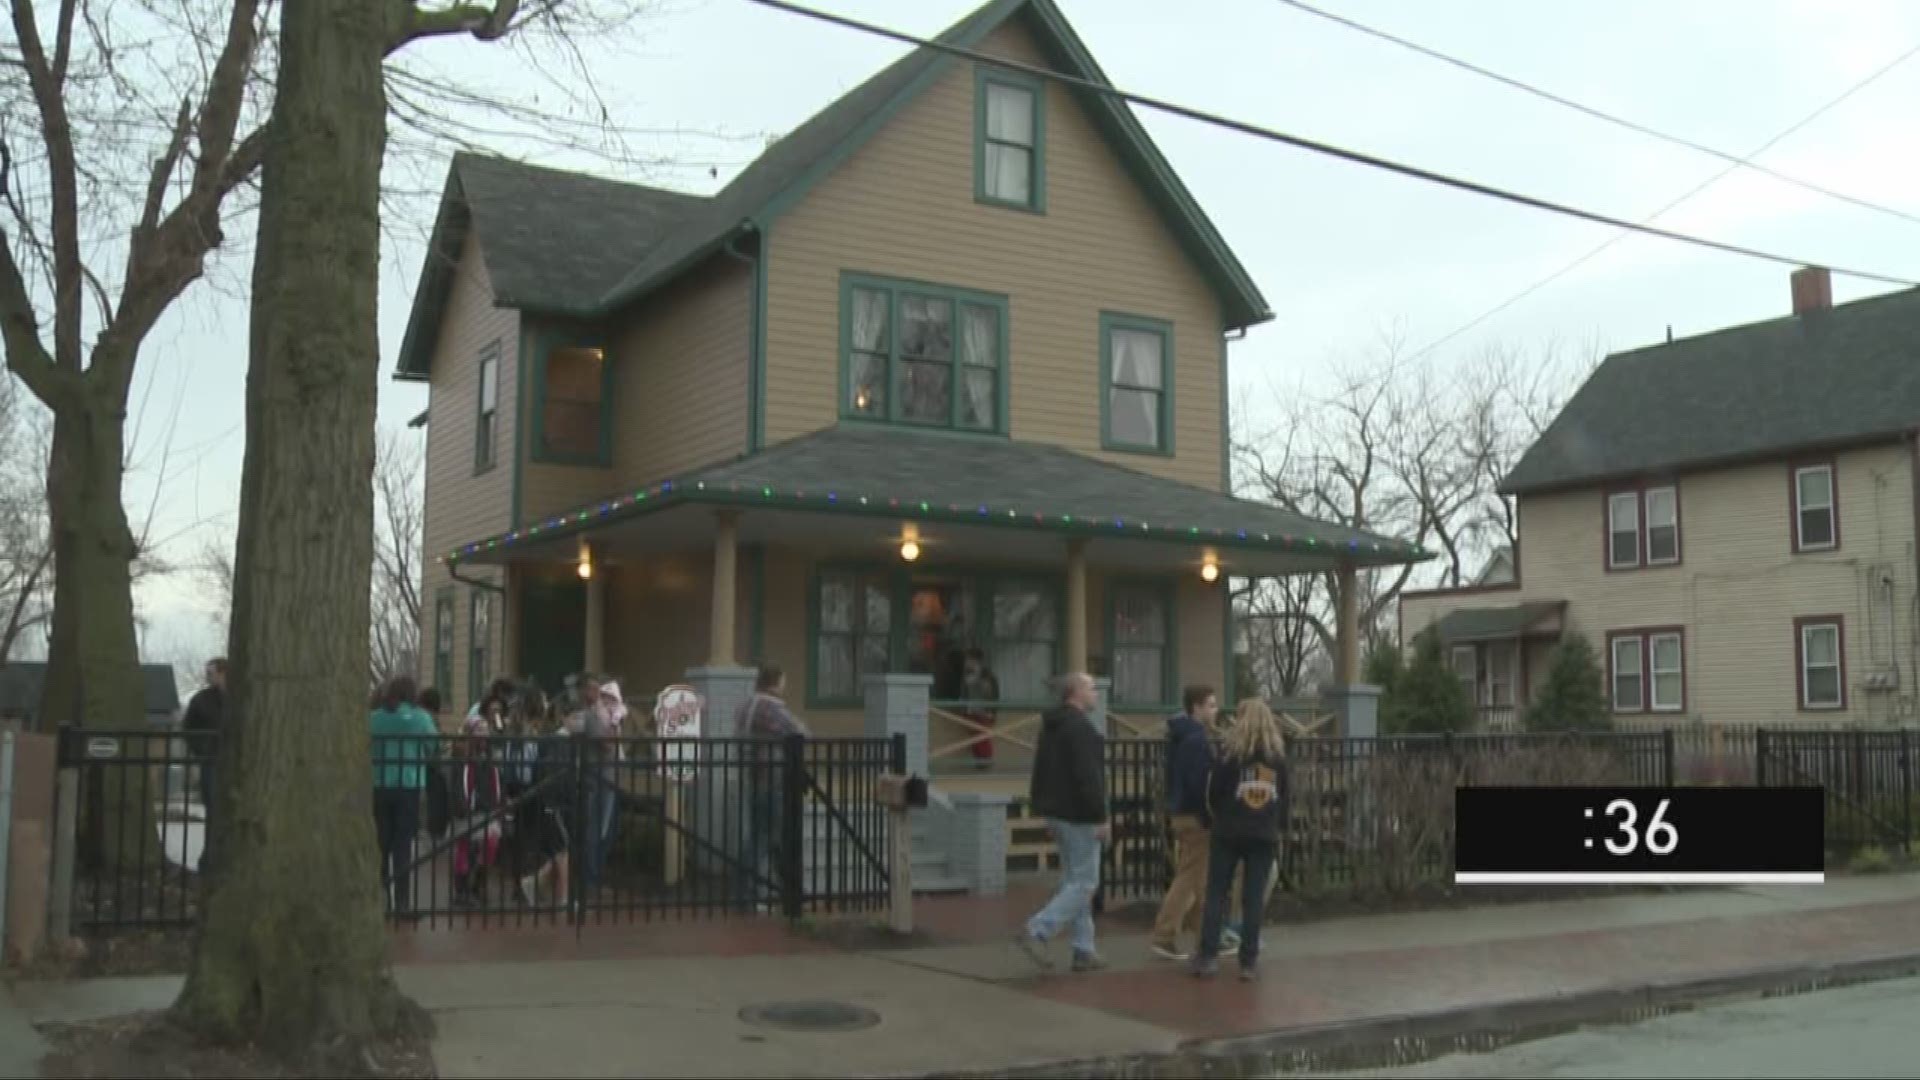 You can sleep in 'A Christmas Story' house